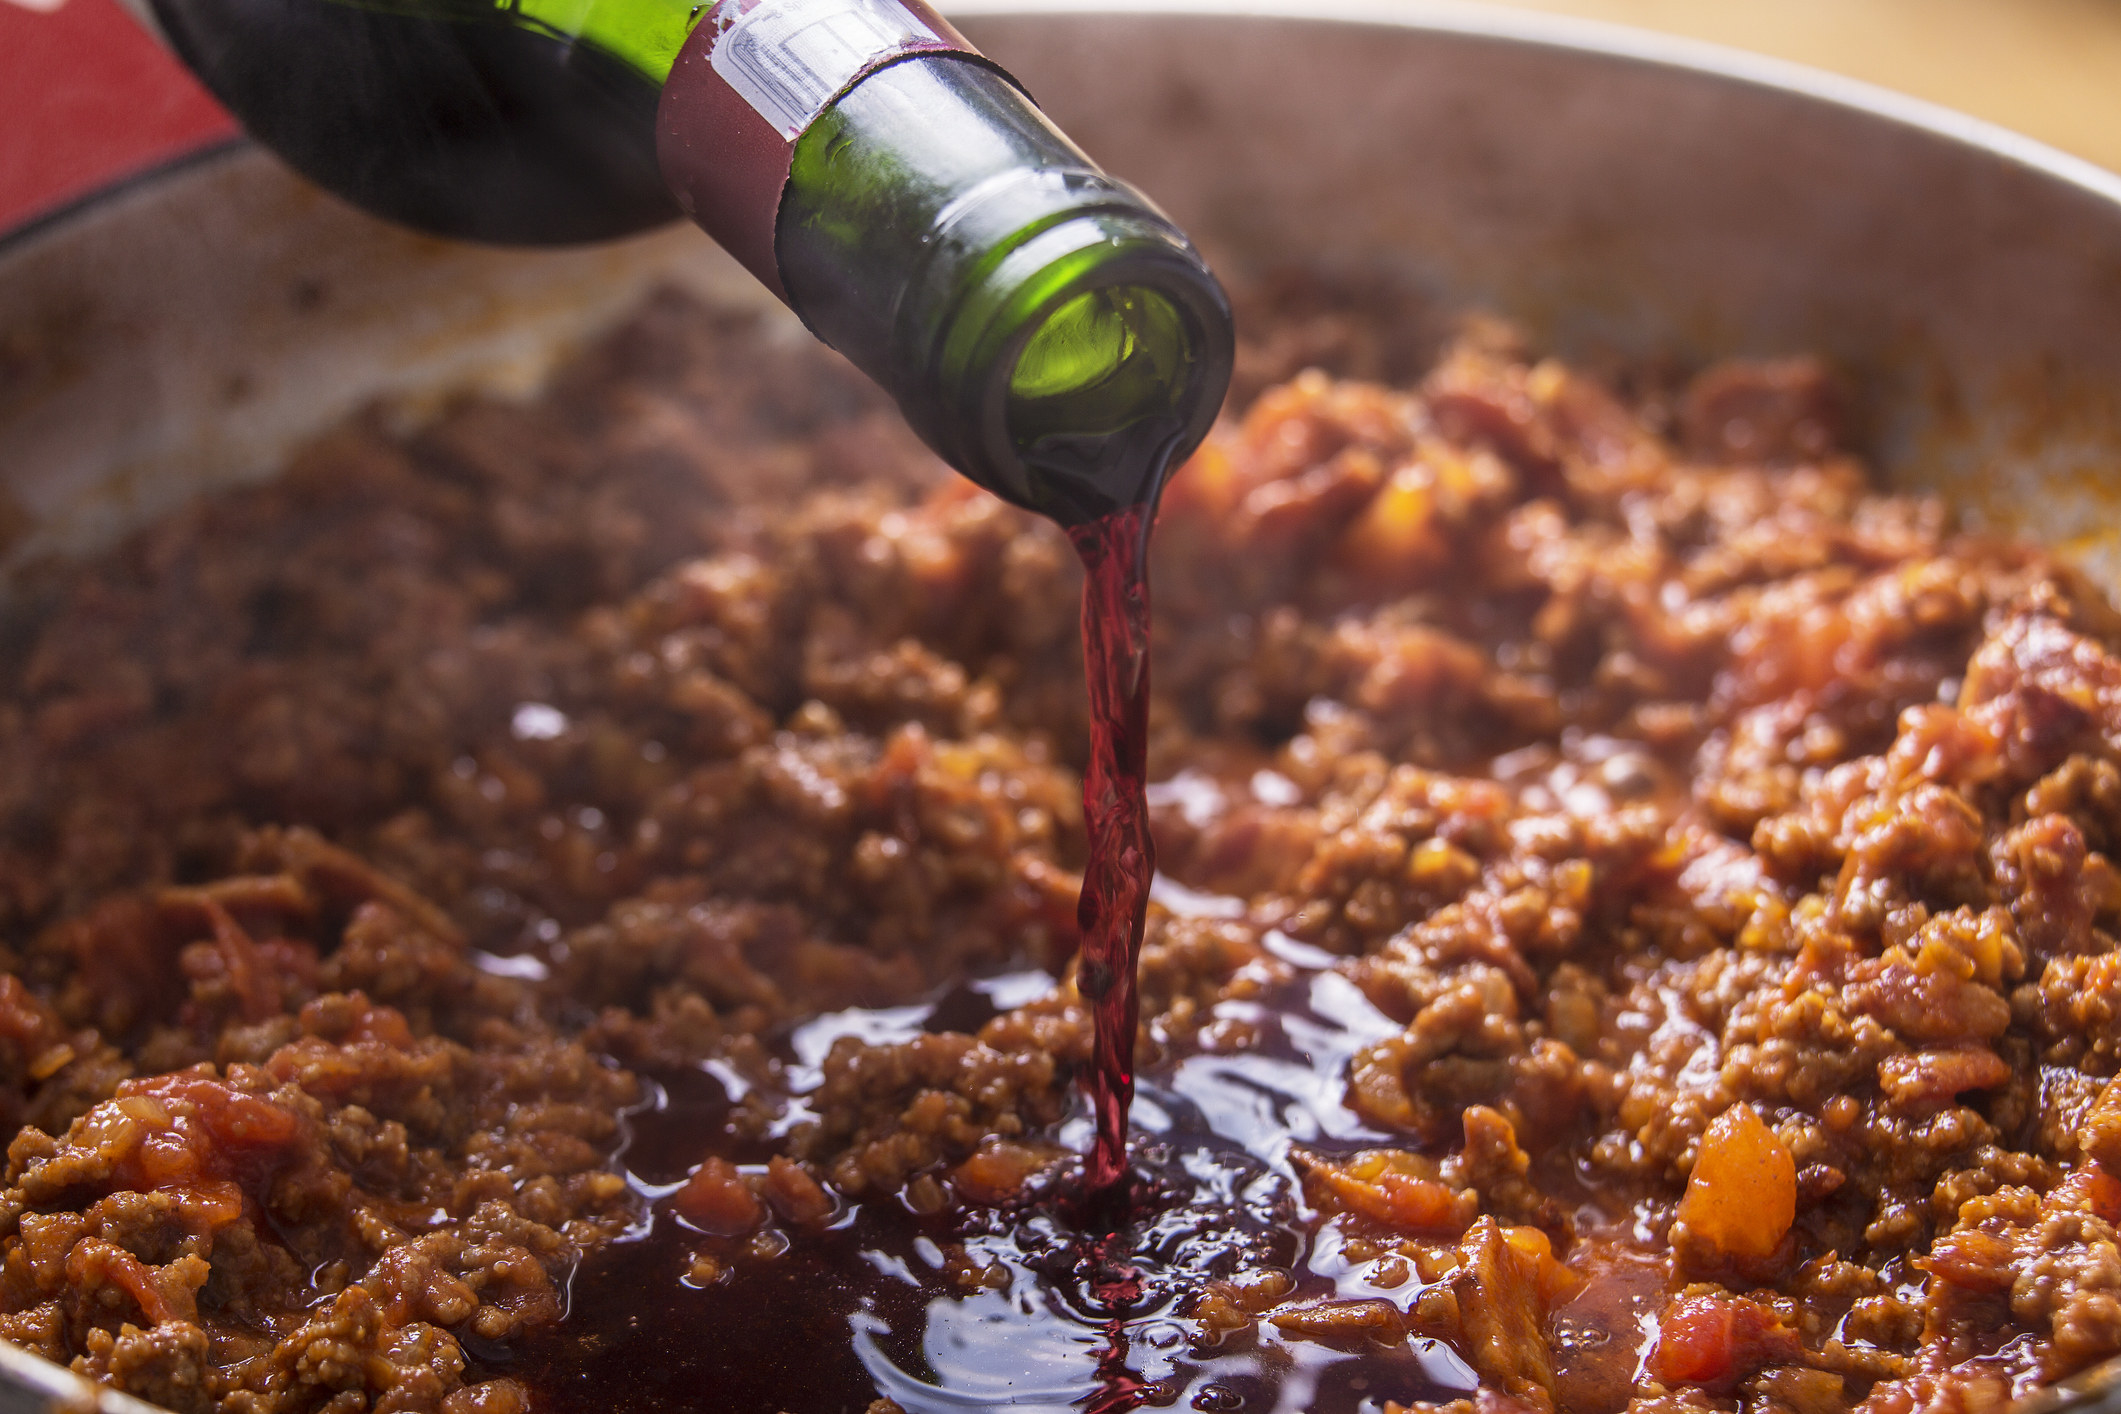 Pouring wine into ground beef.